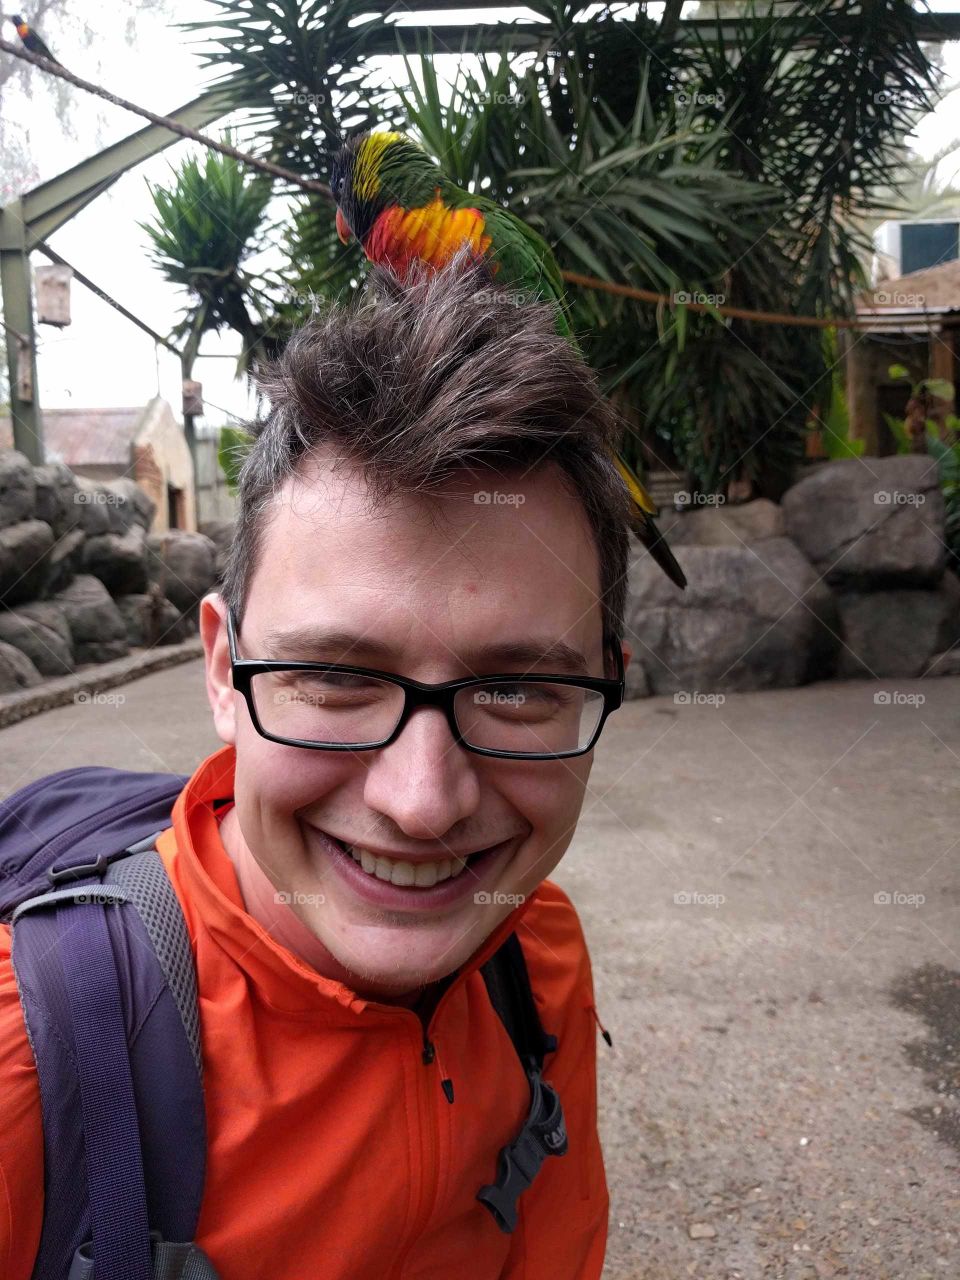 Man with parrot on his head in South Africa